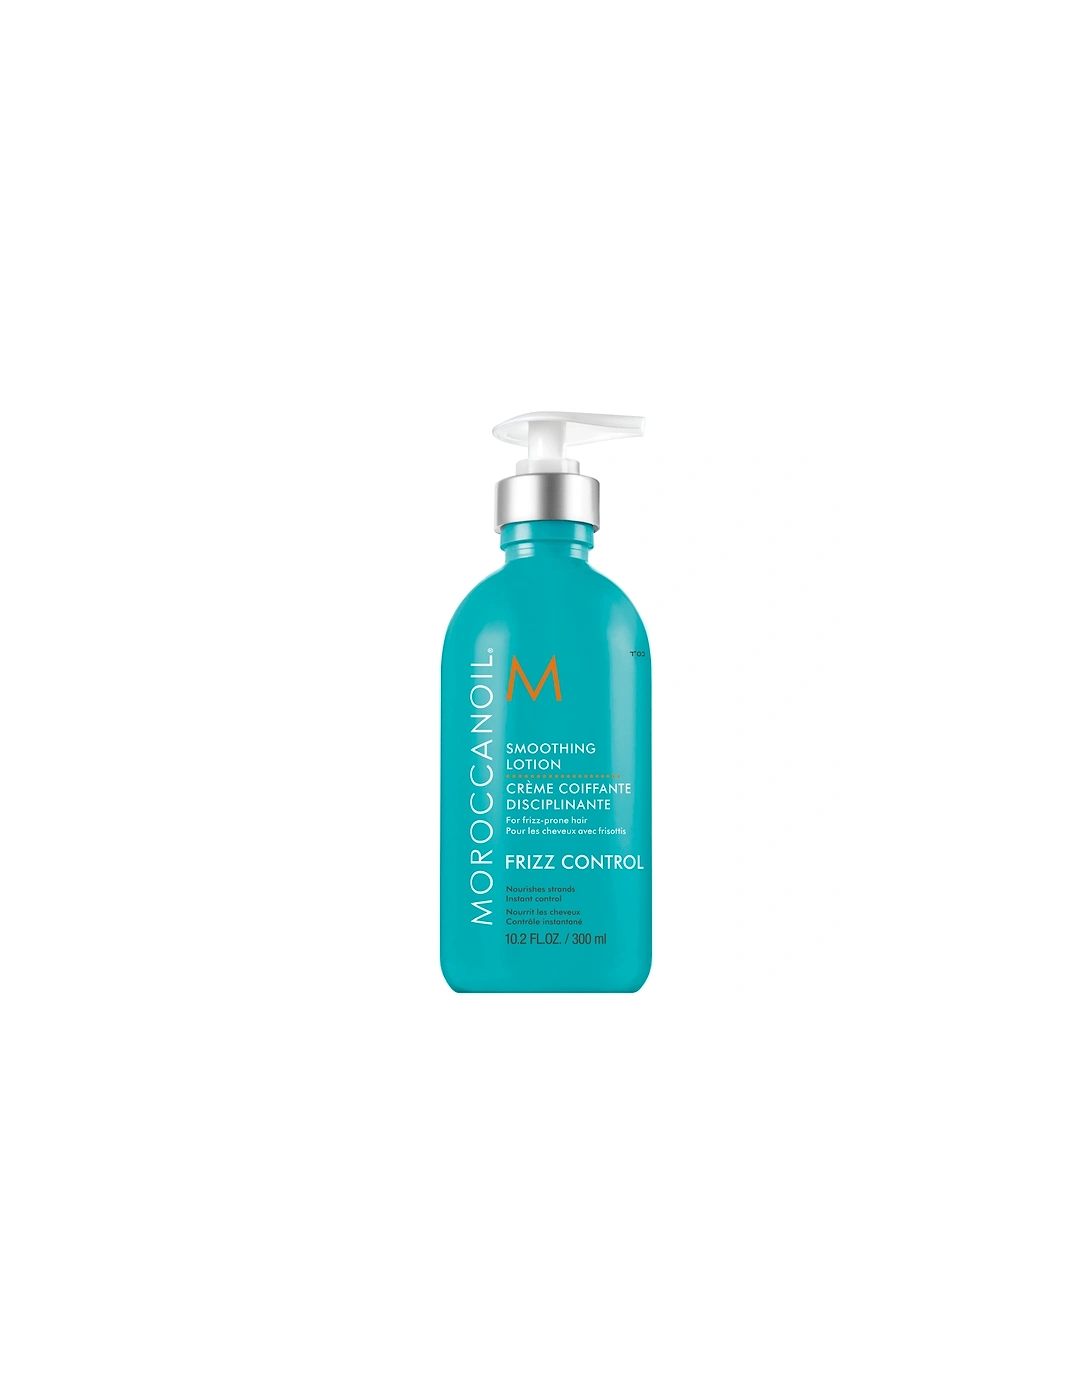 Moroccanoil Smoothing Lotion 300ml - Moroccanoil, 2 of 1